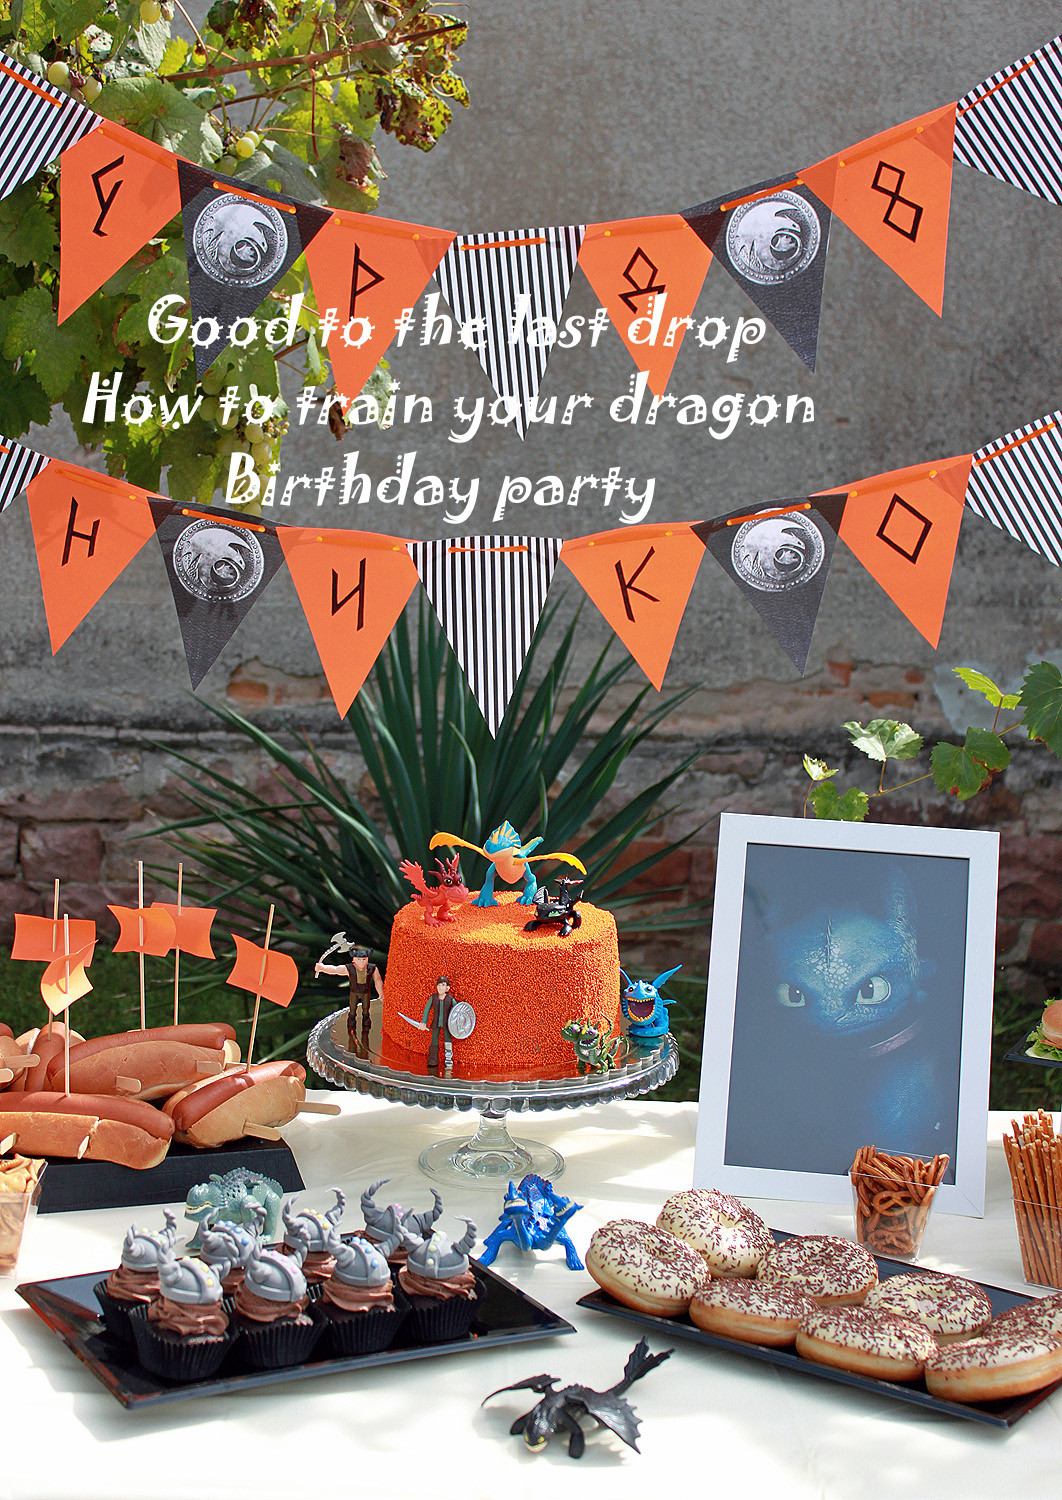 How To Train Your Dragon Birthday Party
 How to Train Your Dragon Birthday Party – Good to the last